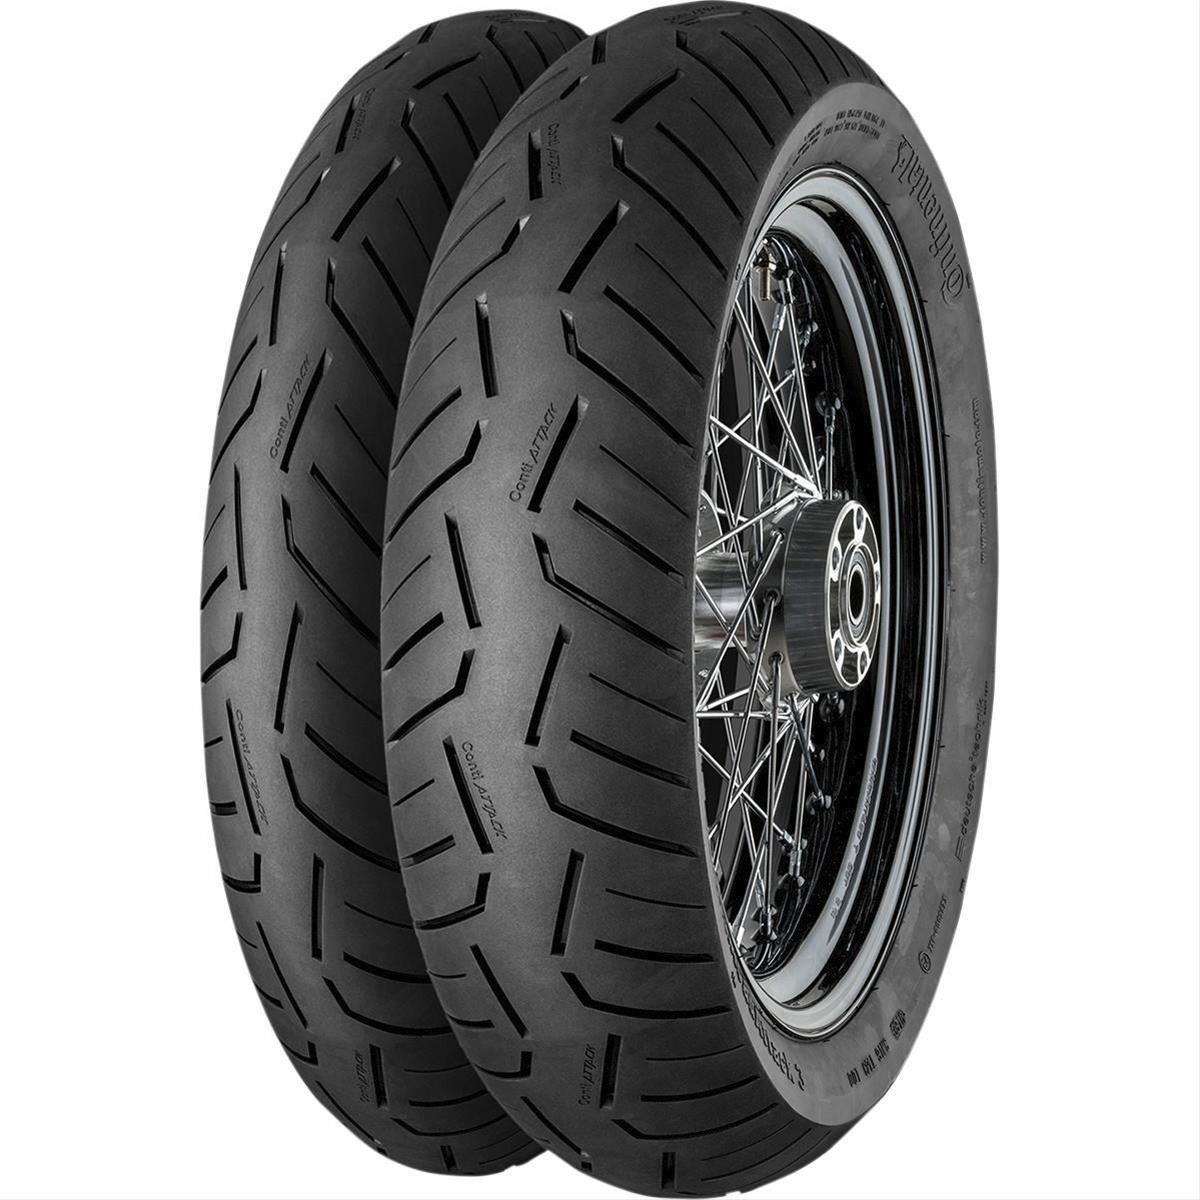 Continental Motorcycle Tires 02445130000 Continental Tire